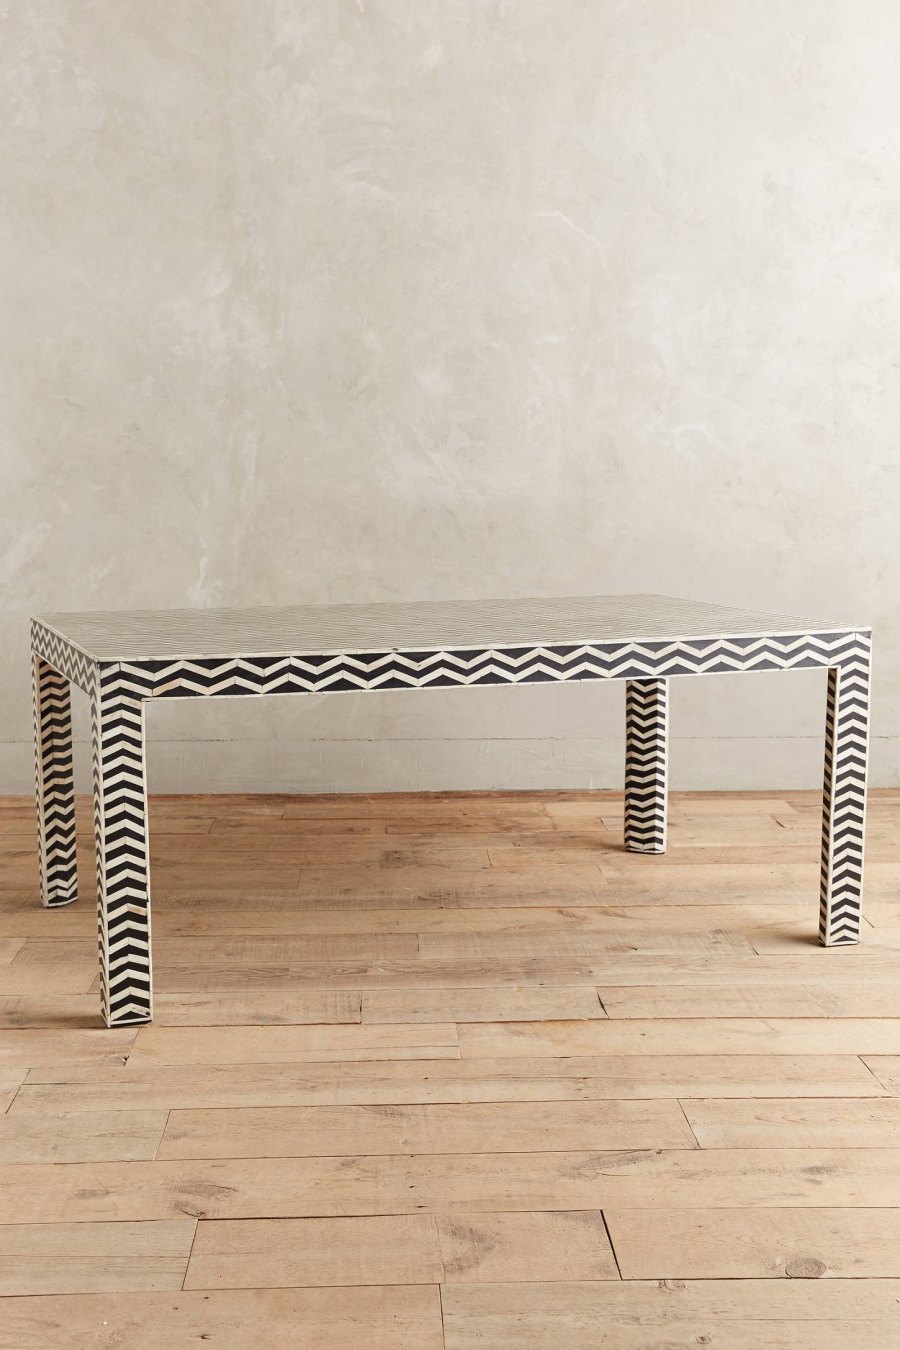 Chevron- and zigzag-patterned table from Anthropologie